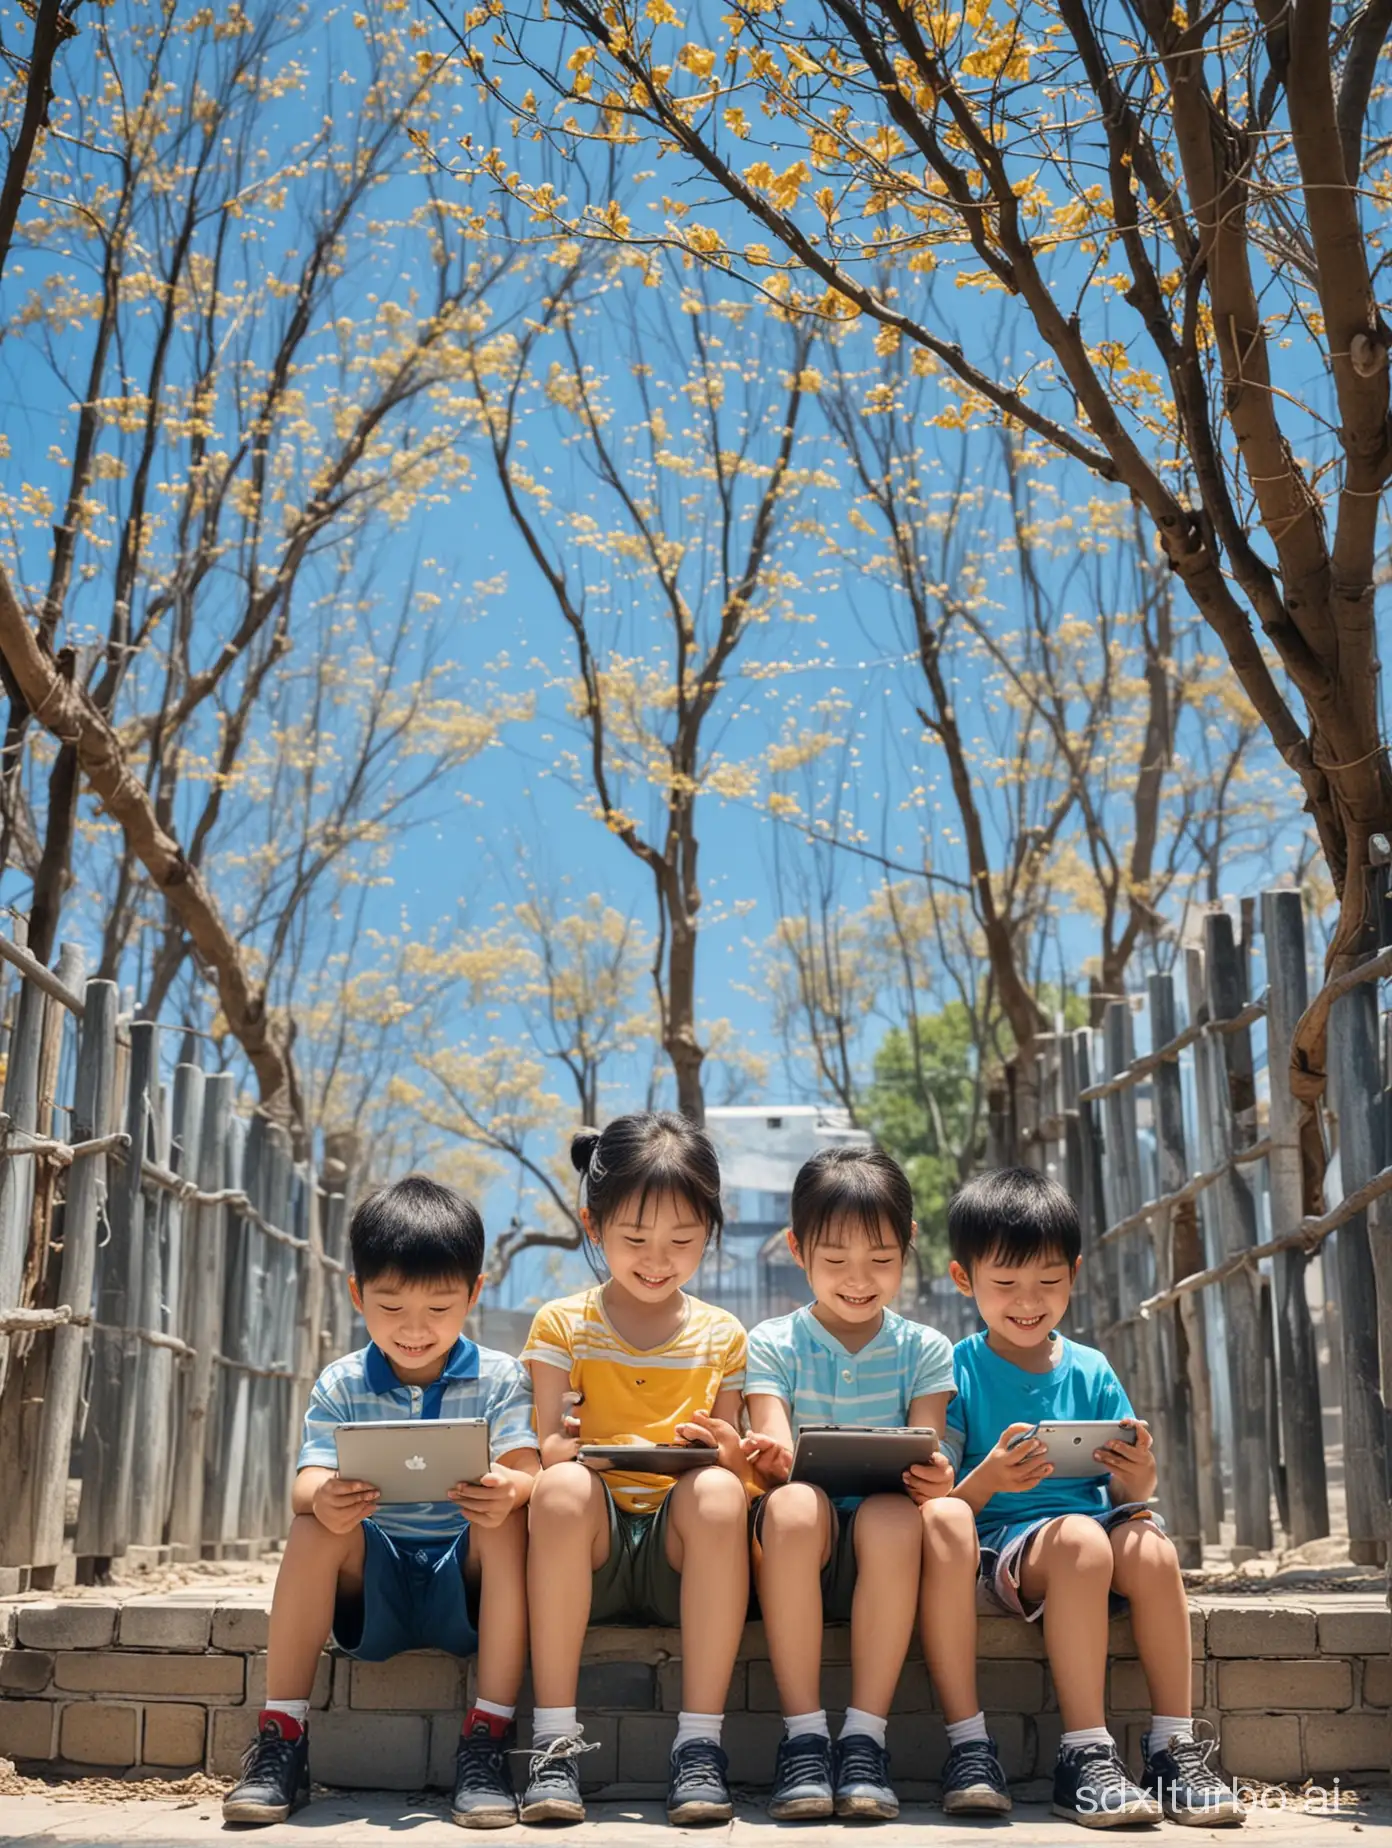 Under the blue sky and sunshine, Chinese children happily use multimedia devices.